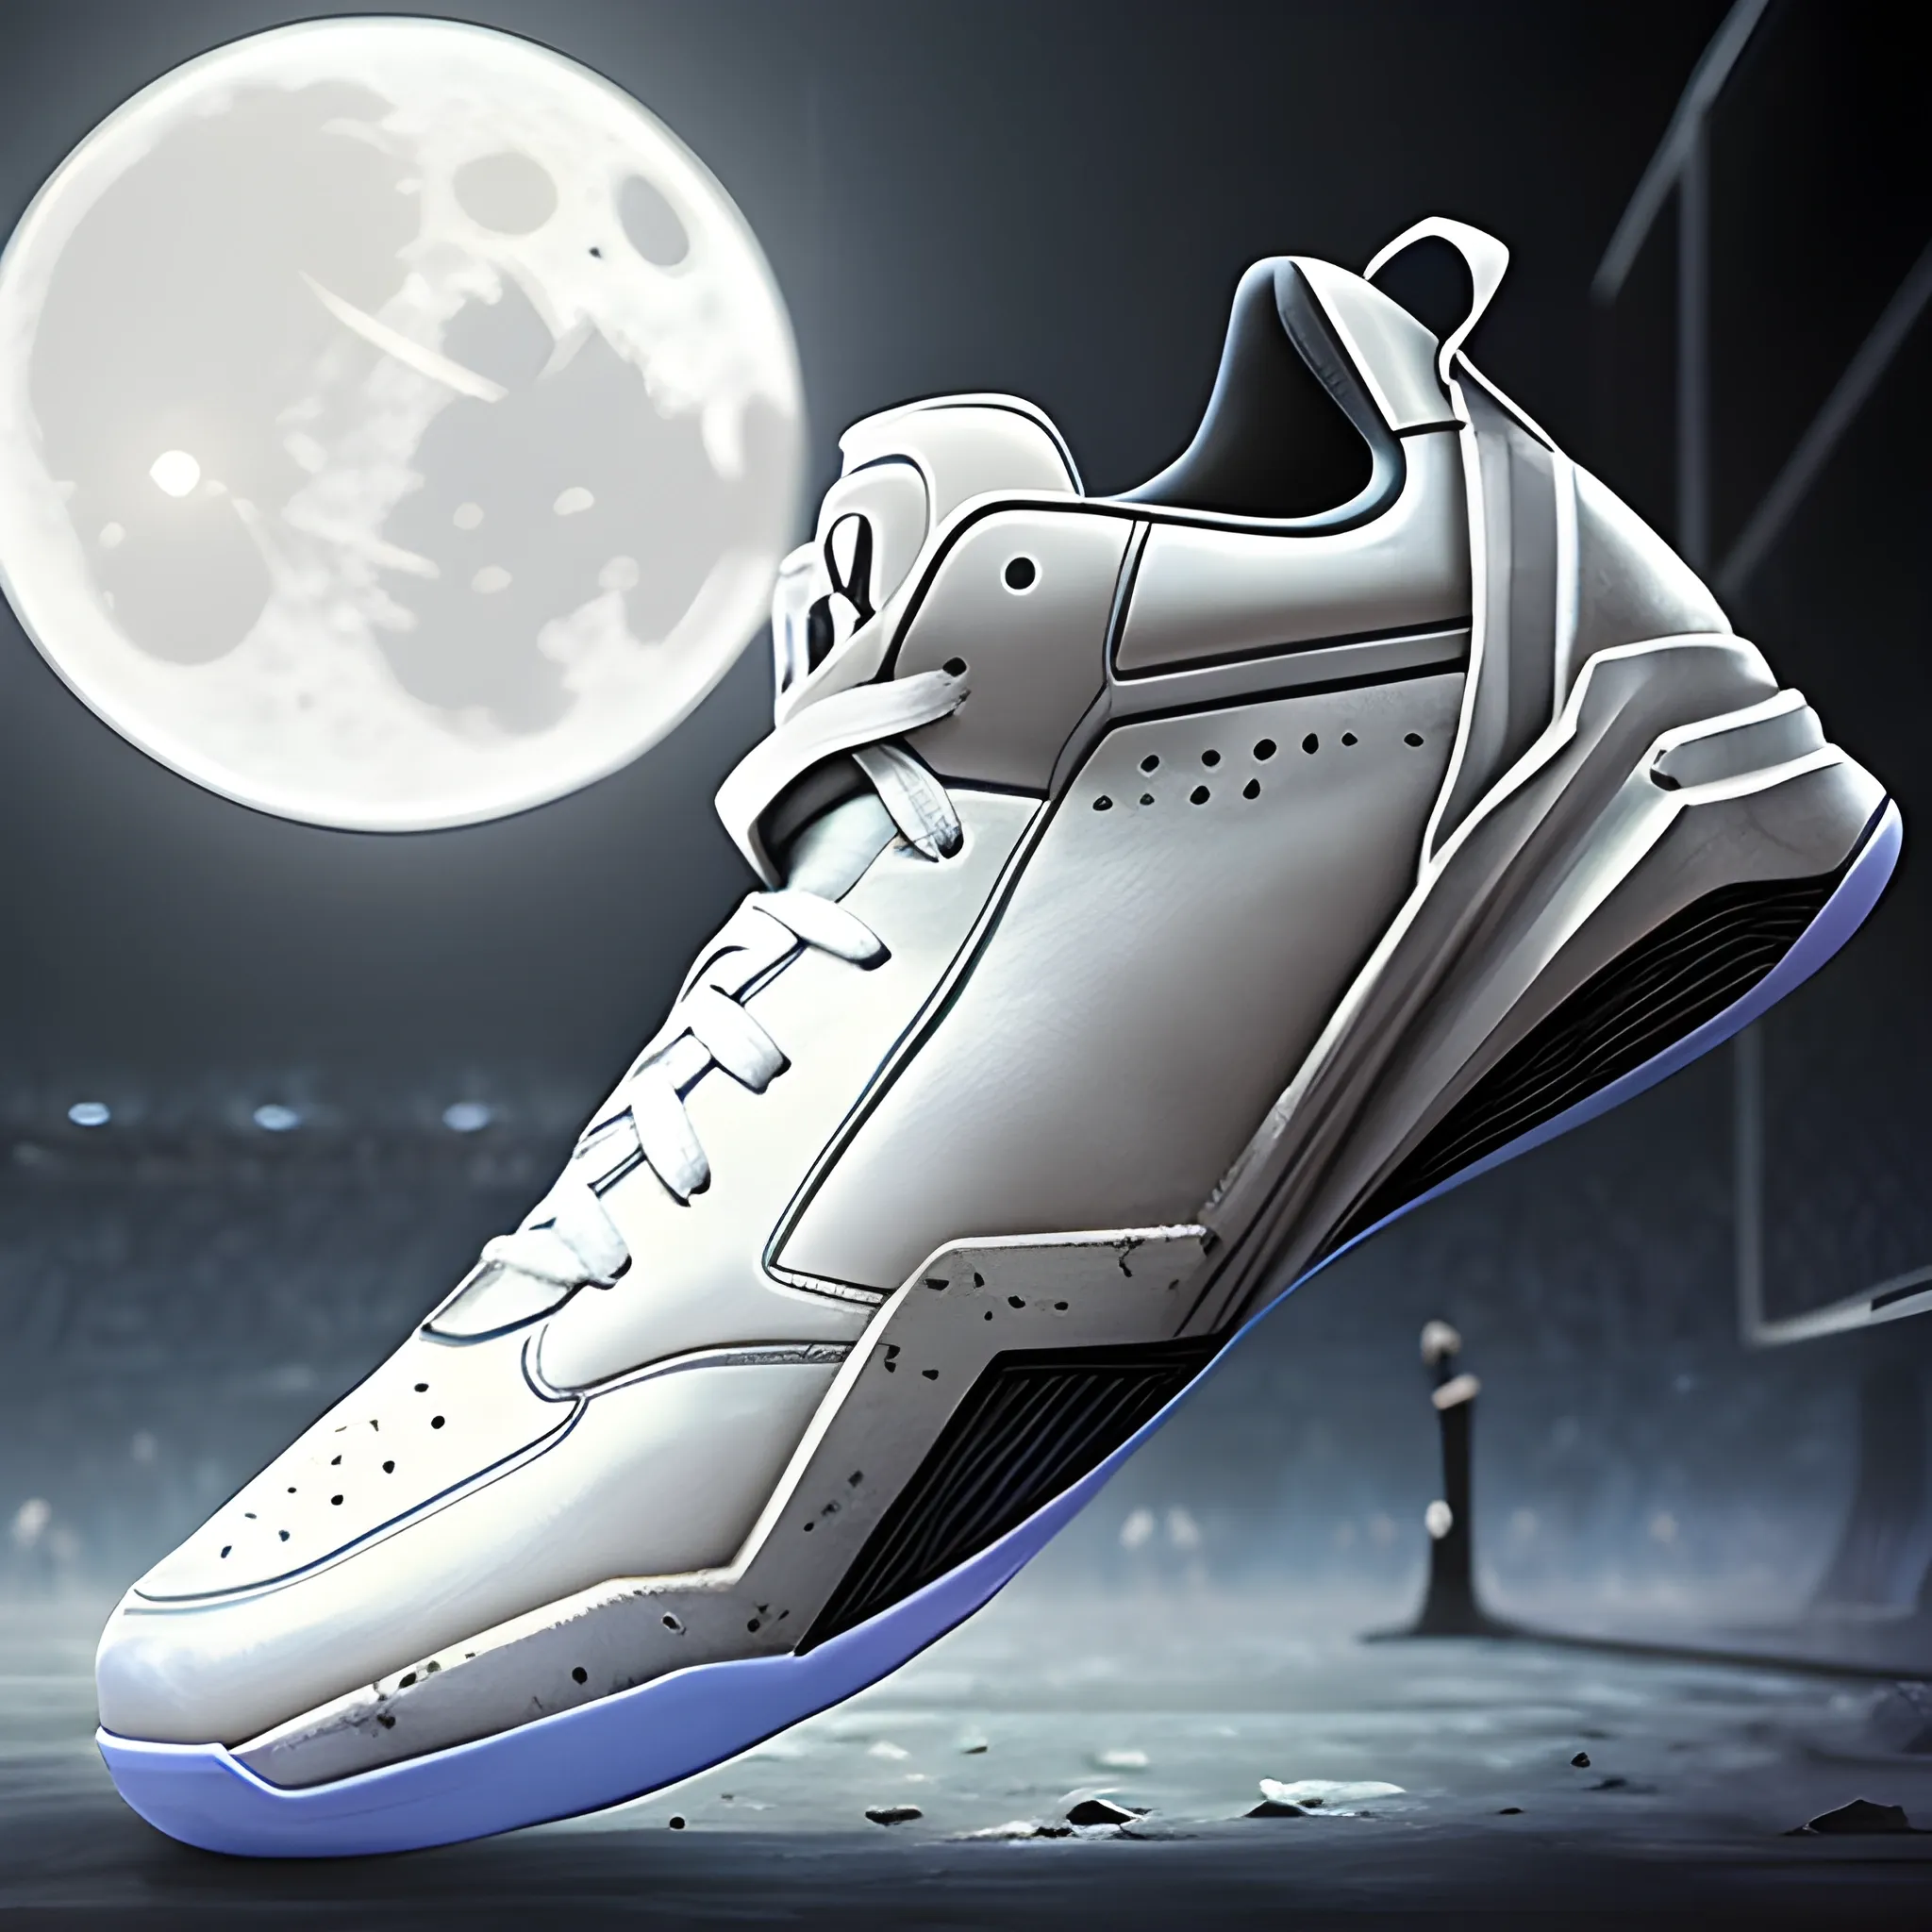 concept moon knight Basketball sneakers , popular in art station, smooth, sharp focus
